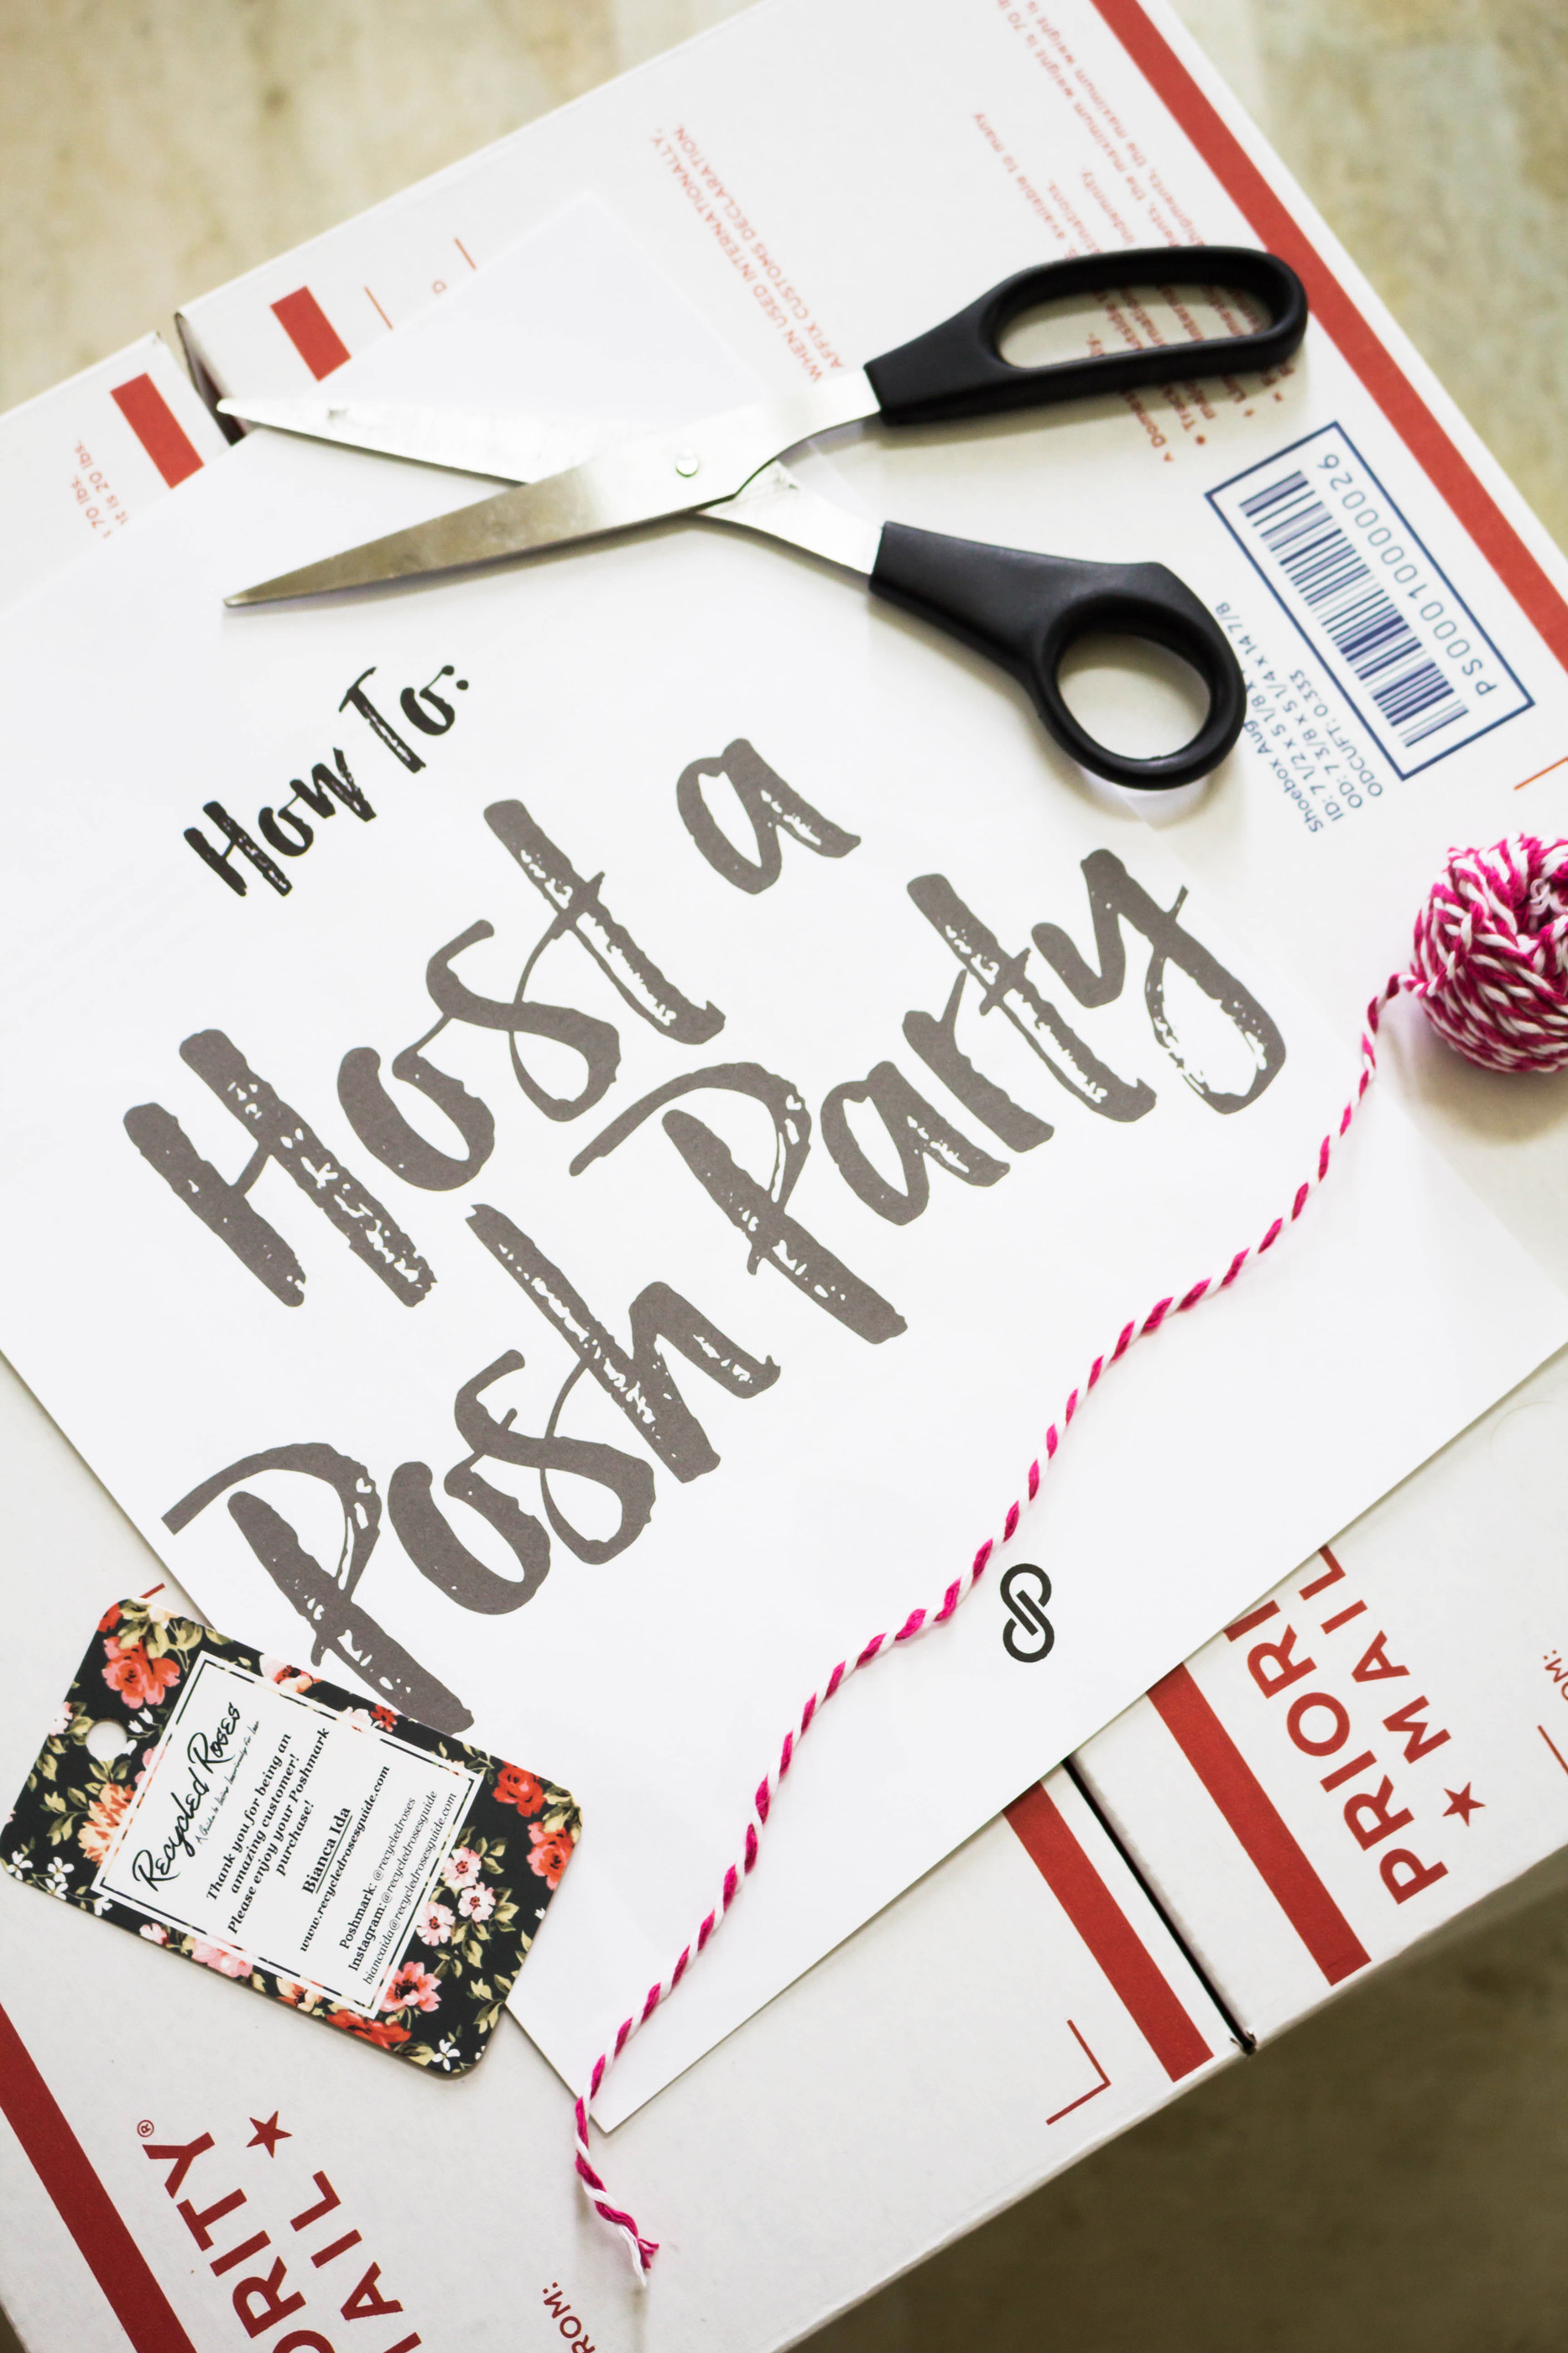 Hosting a Poshmark Party: The Good, The Bad, and the Ugly